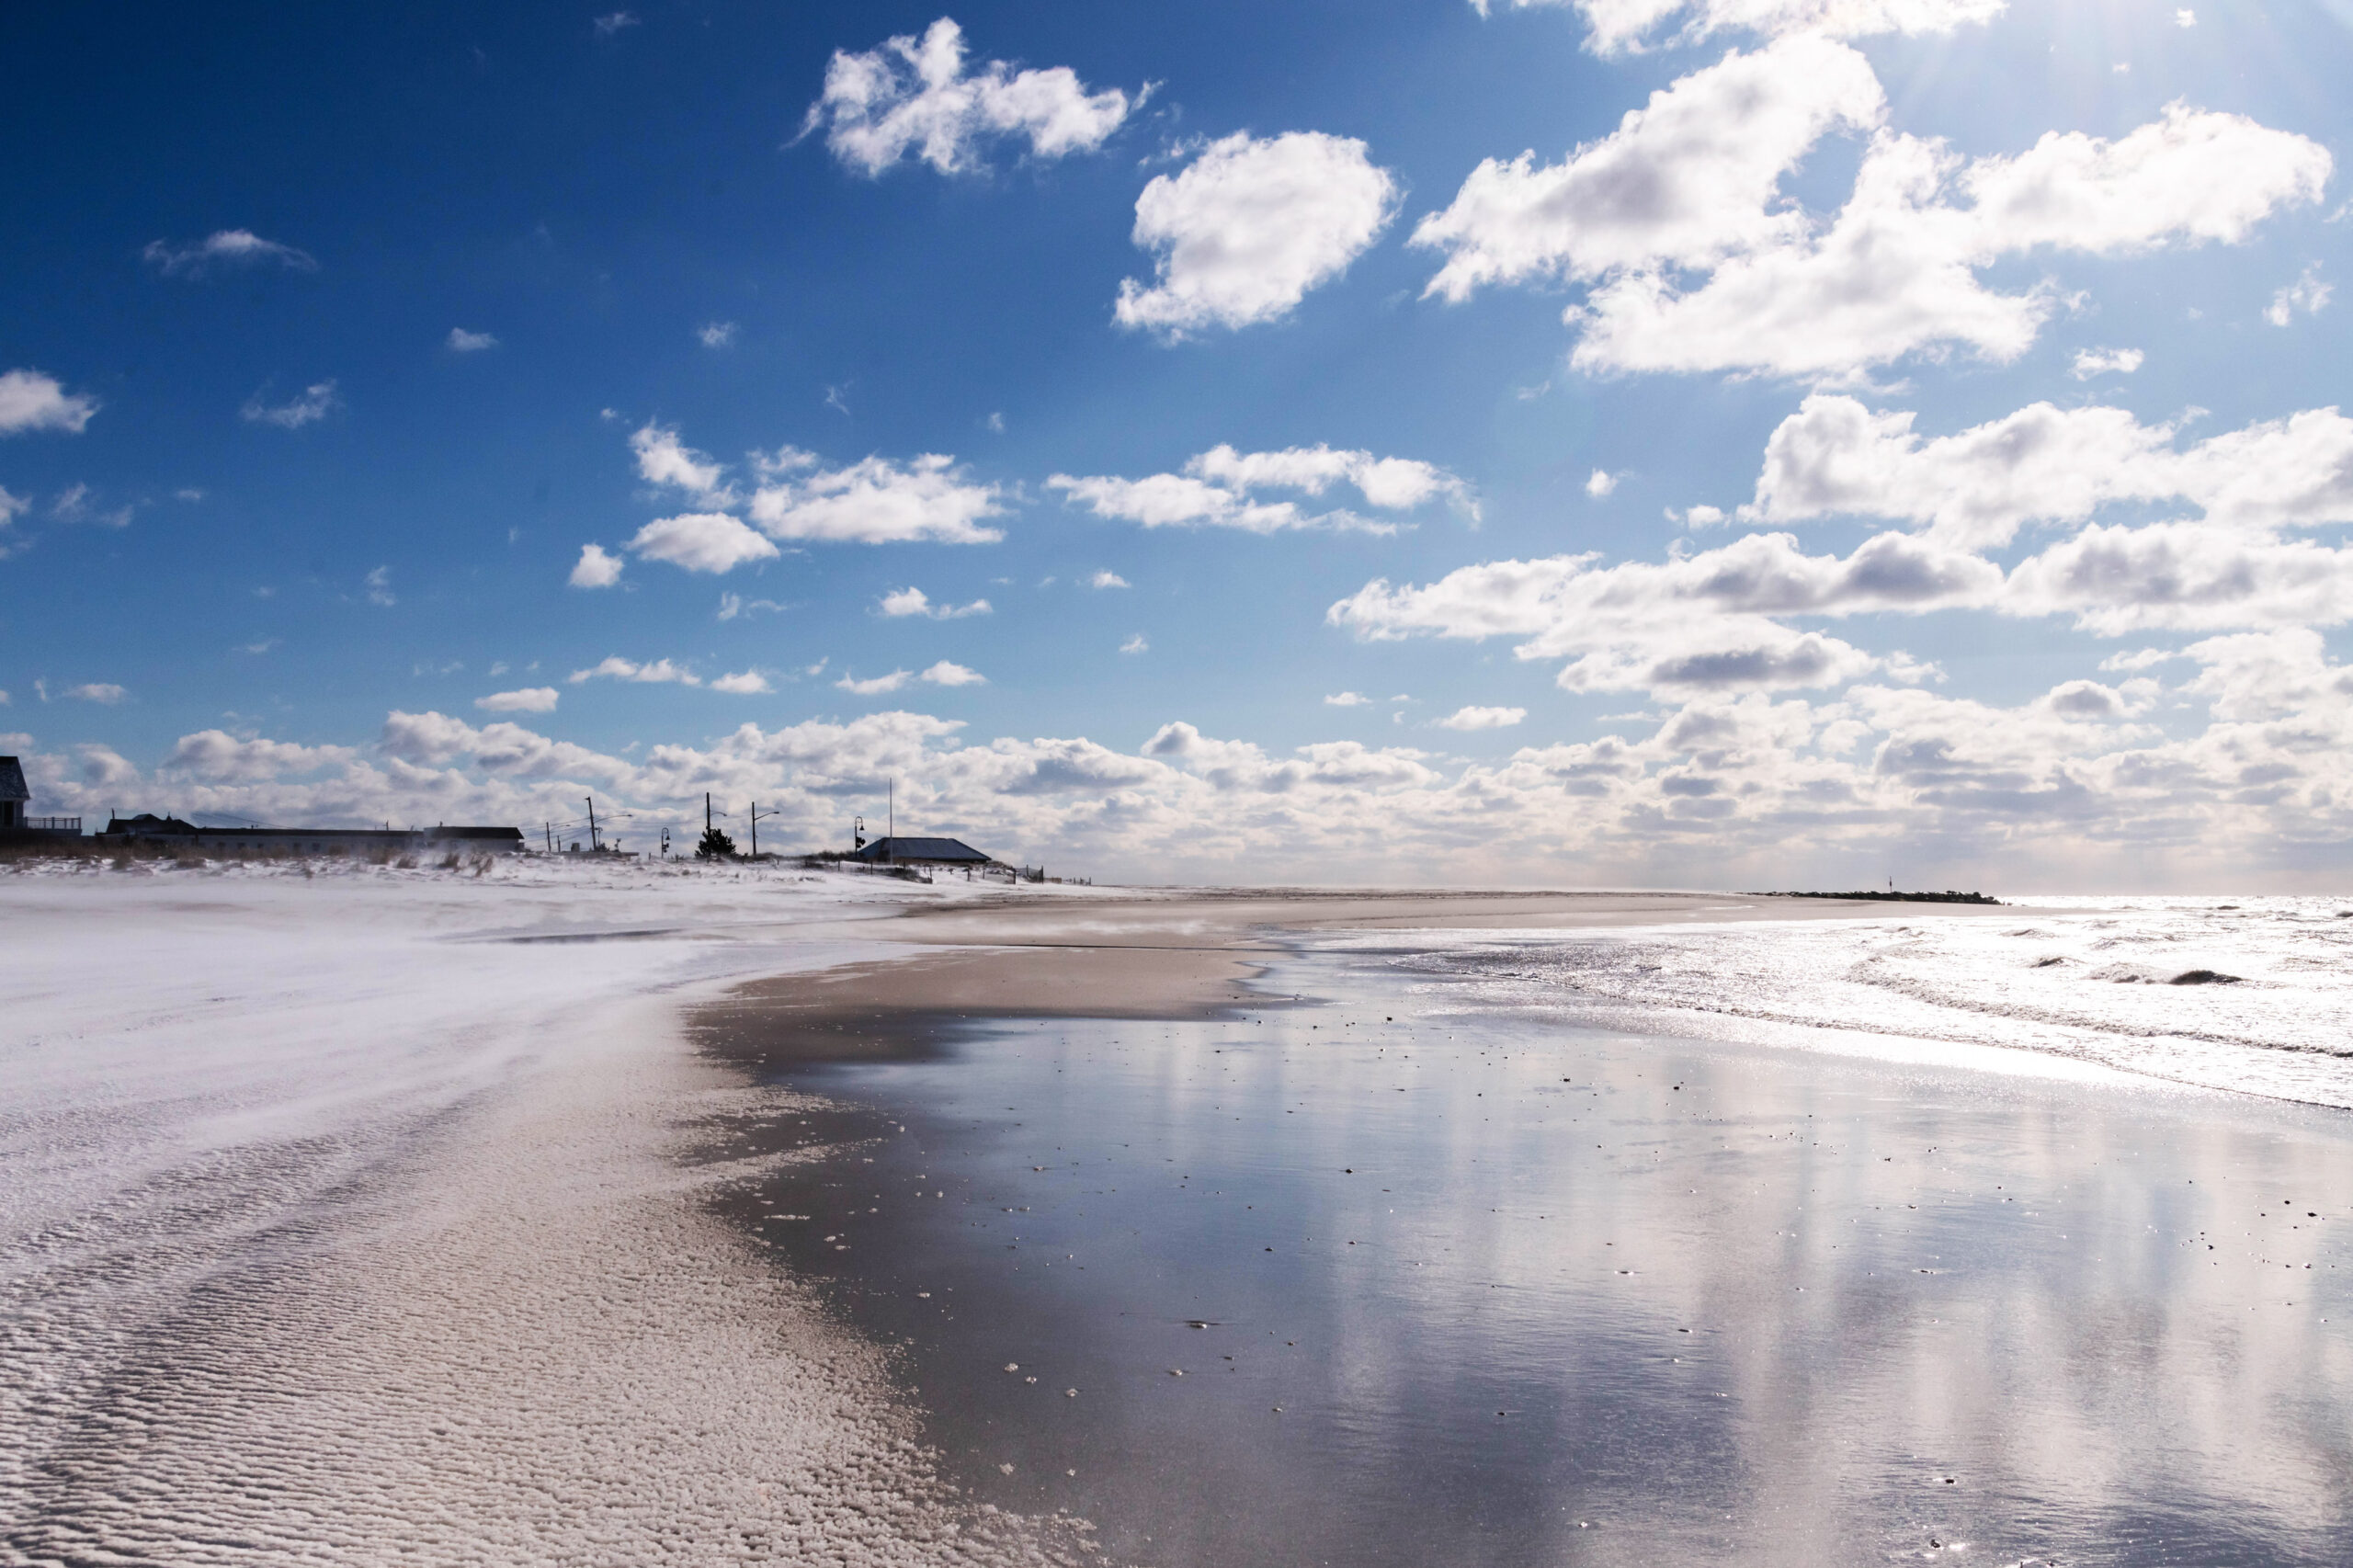 Snow on the beach with puffy clouds in a blue sky. The sky and clouds are reflected in the ocean and shoreline.